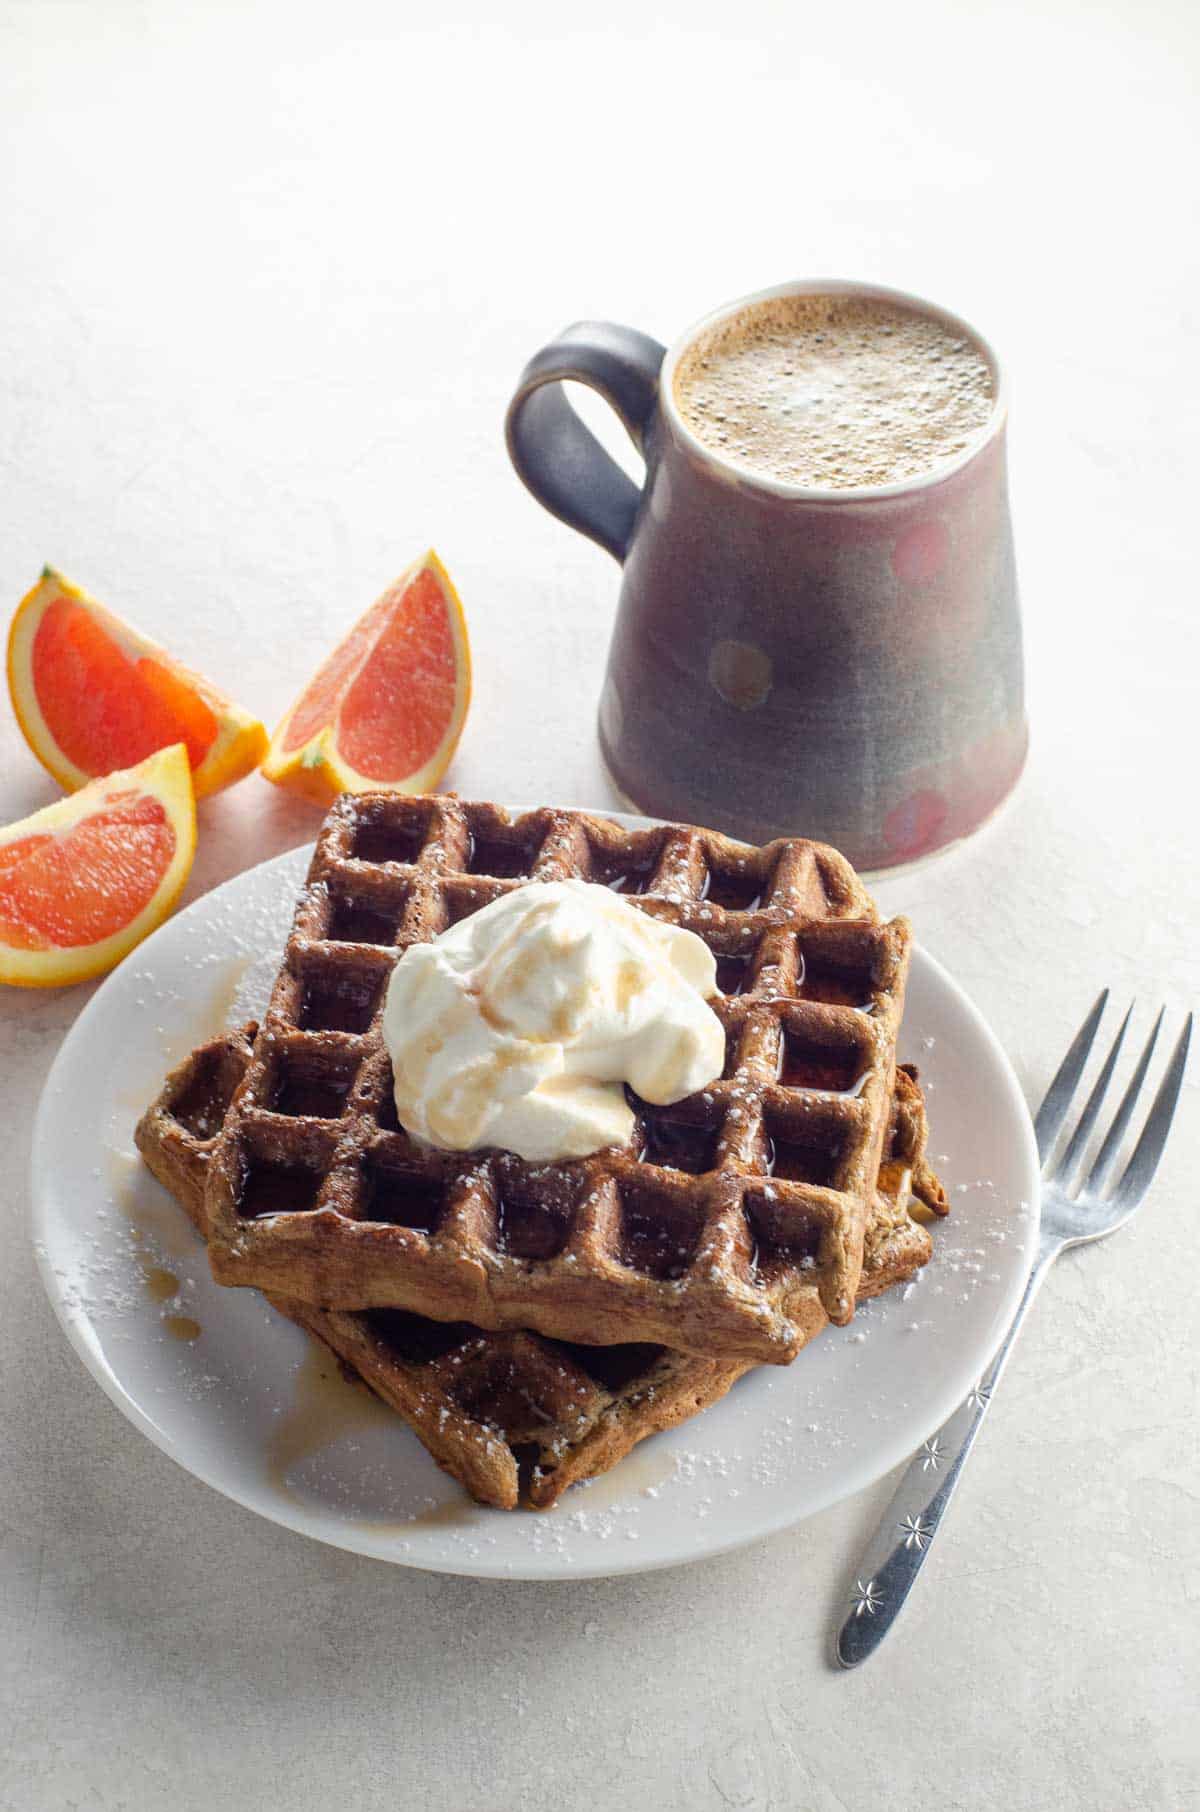 gingerbread waffles topped with whipped cream and syrup with orange wedges and coffee